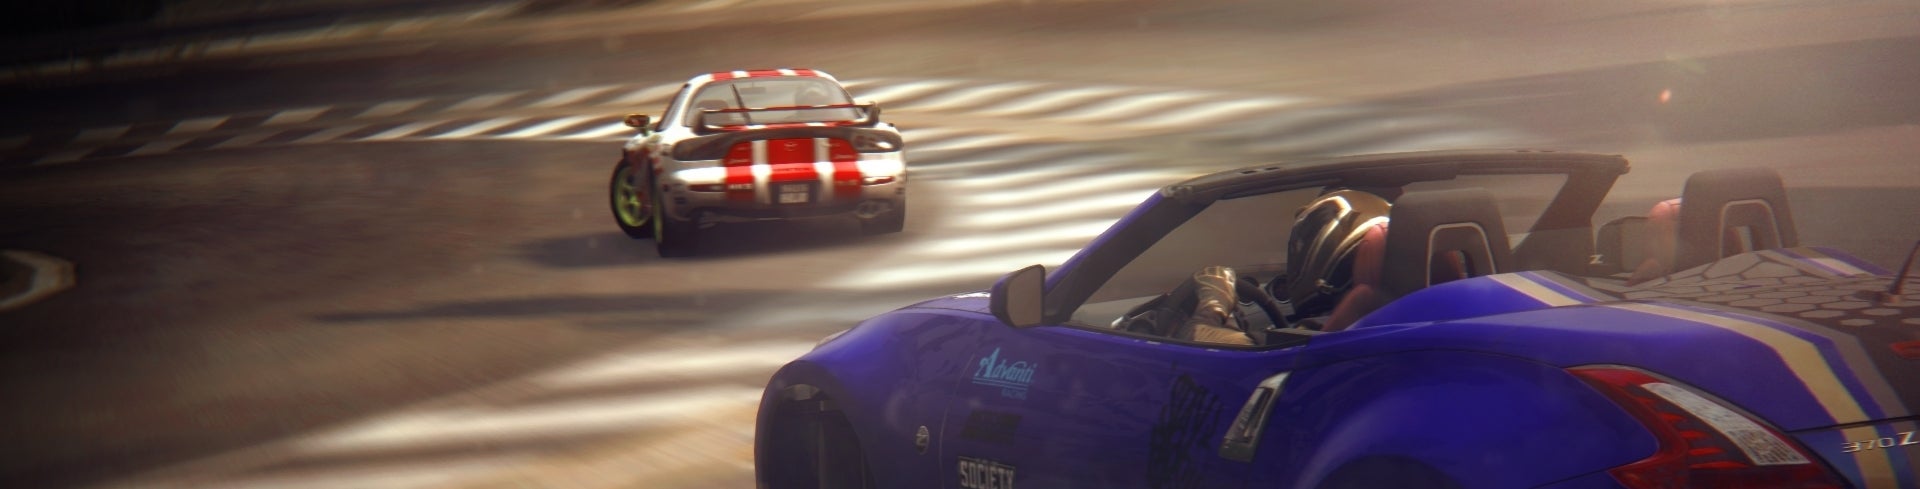 Image for Grid 2 review